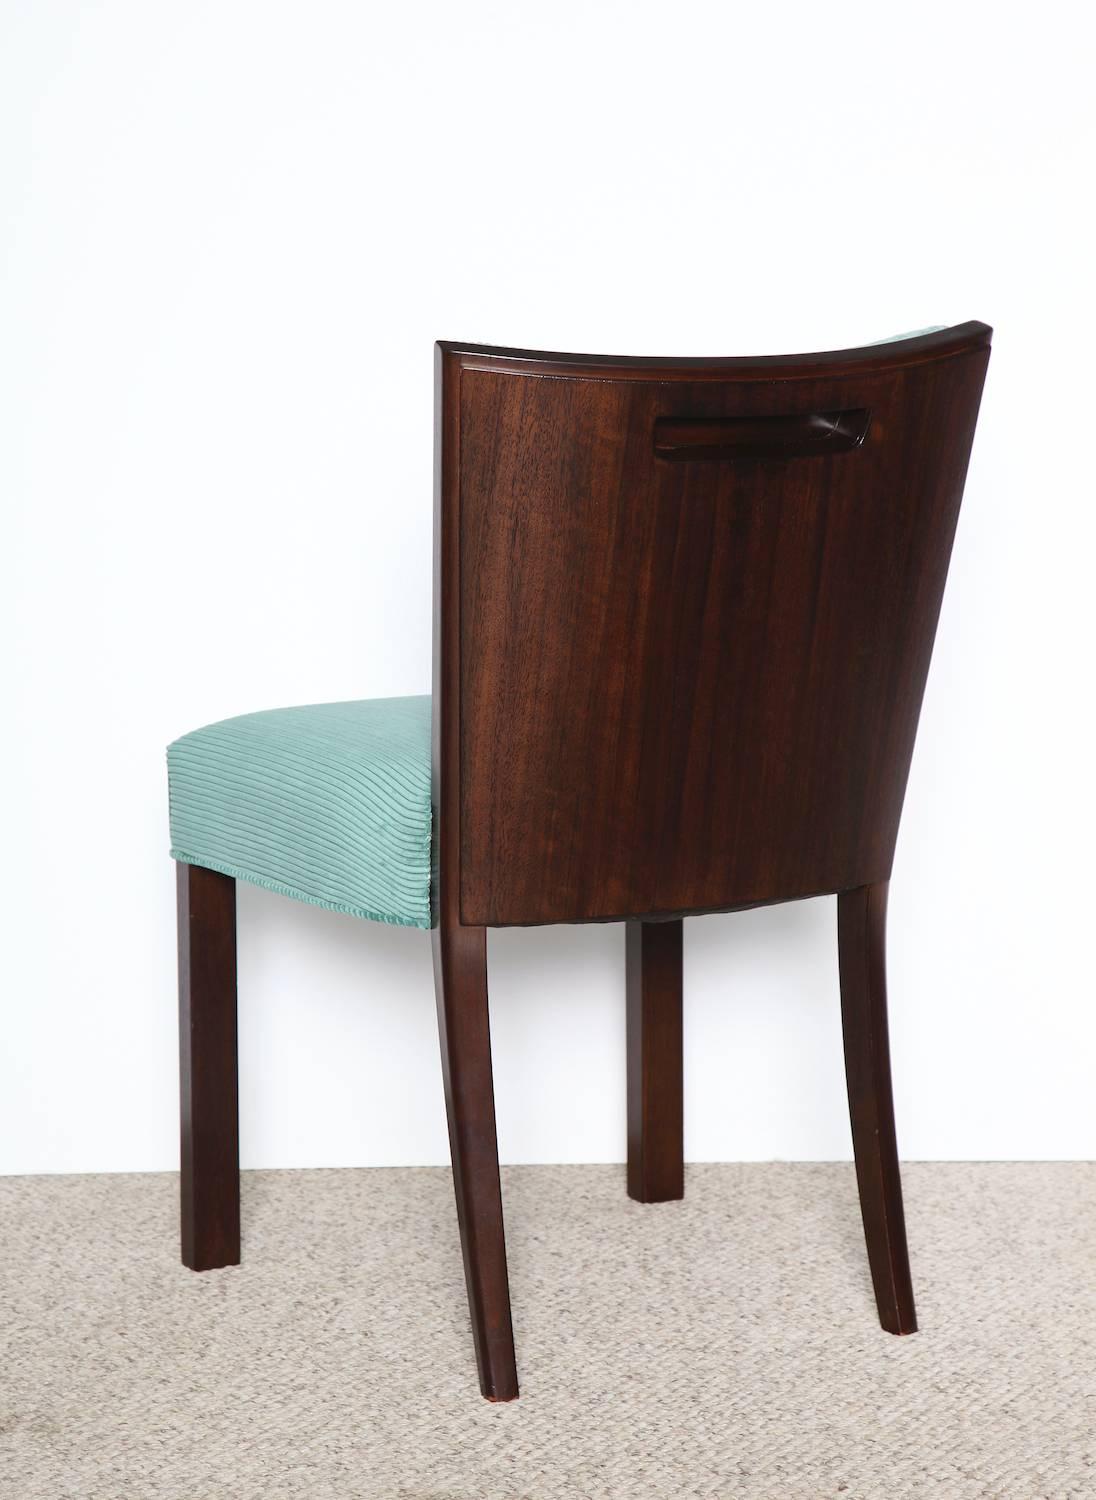 Custom designed pull-up chair by Paul Laszlo.  Dark stained mahogany frame, with recessed grip detail on the back. Upholstered with wide ribbed teal fabric on seat and back.